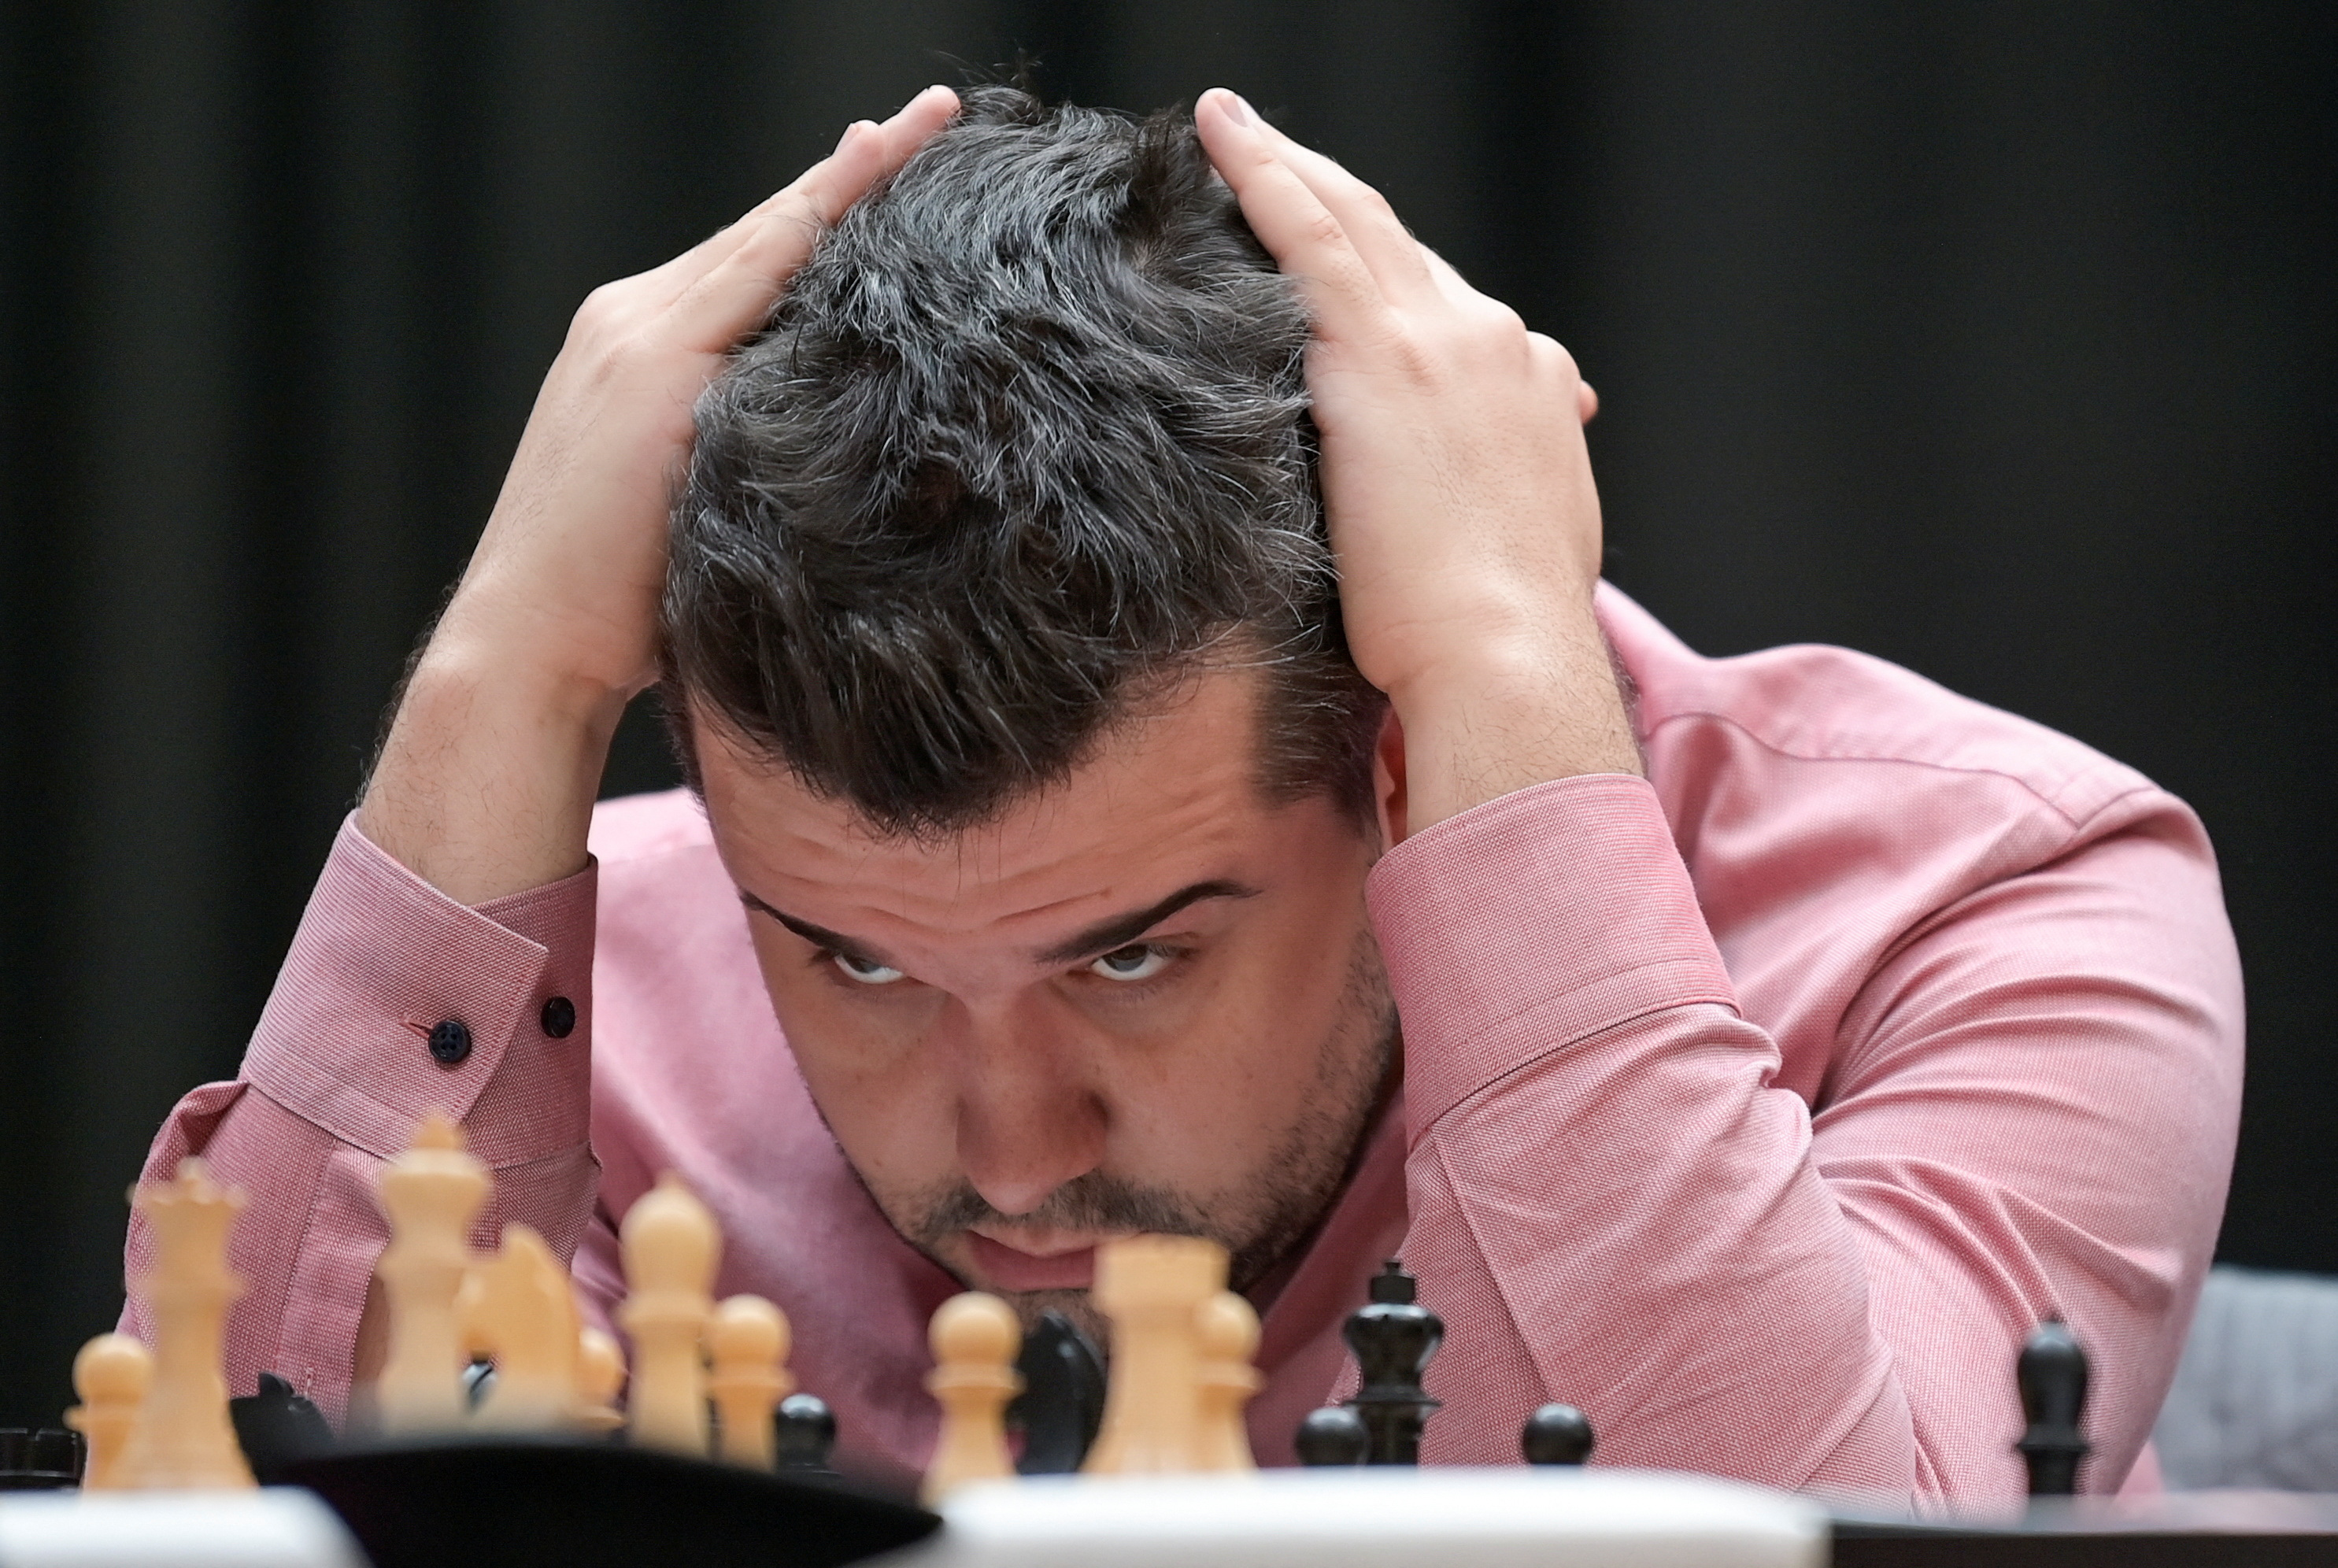 Objectively worse, but practically better: an example from the World Chess  Championship